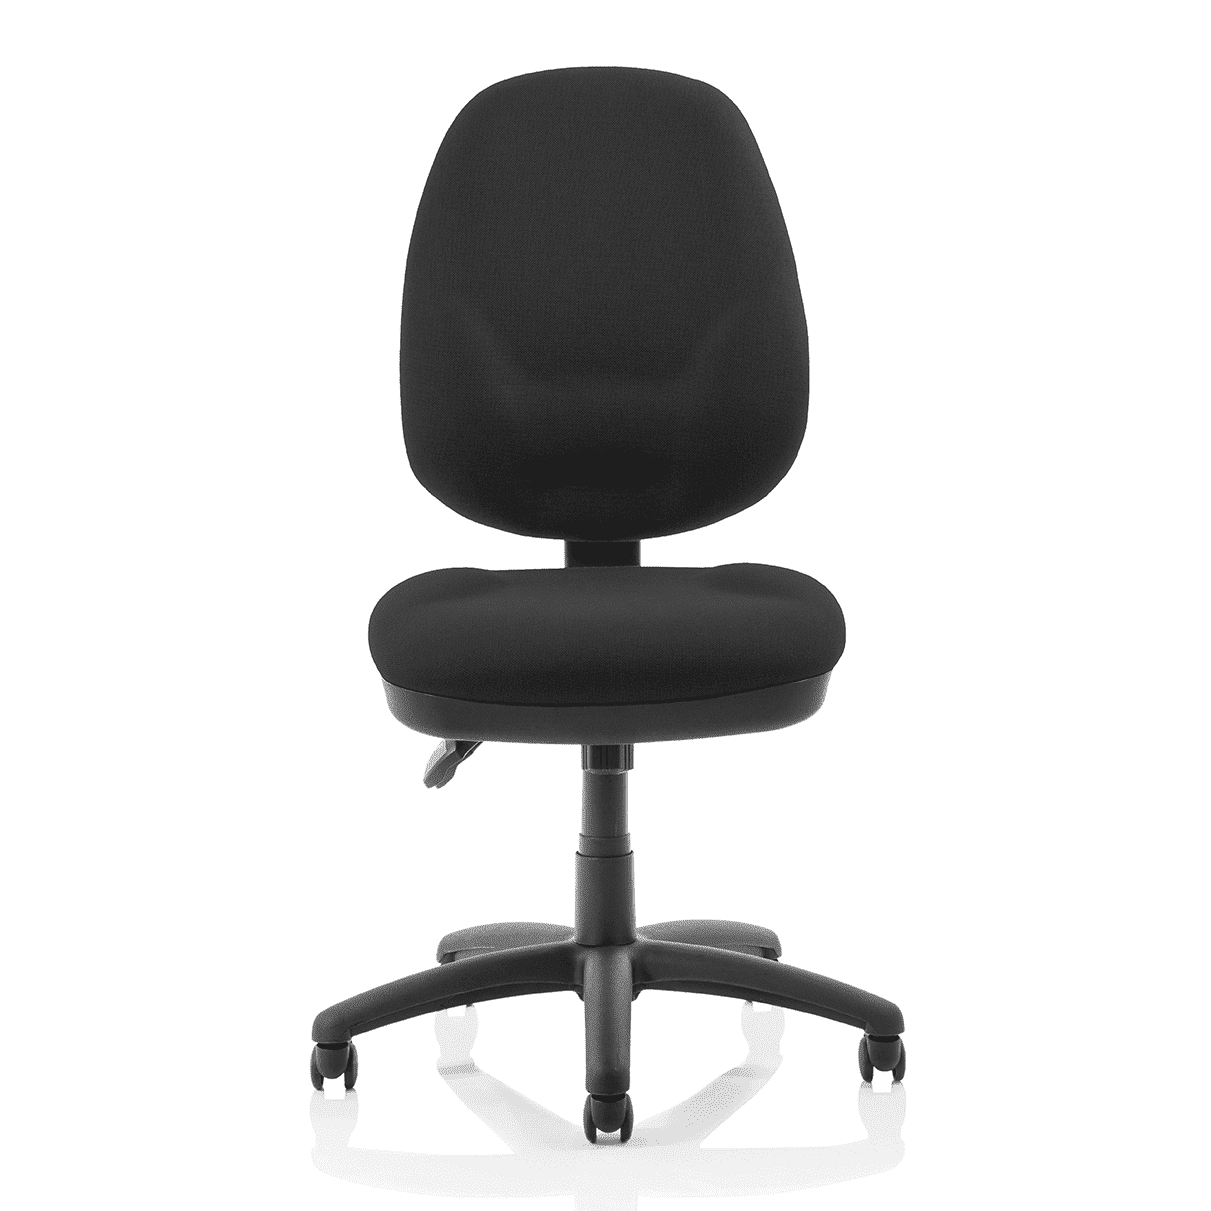 Eclipse Plus XL High Back Task Operator Office Chair - Fabric Seat & Back, Nylon Frame, 125kg Capacity, 8hr Usage, Adjustable Arms, 3yr Mechanism Warranty